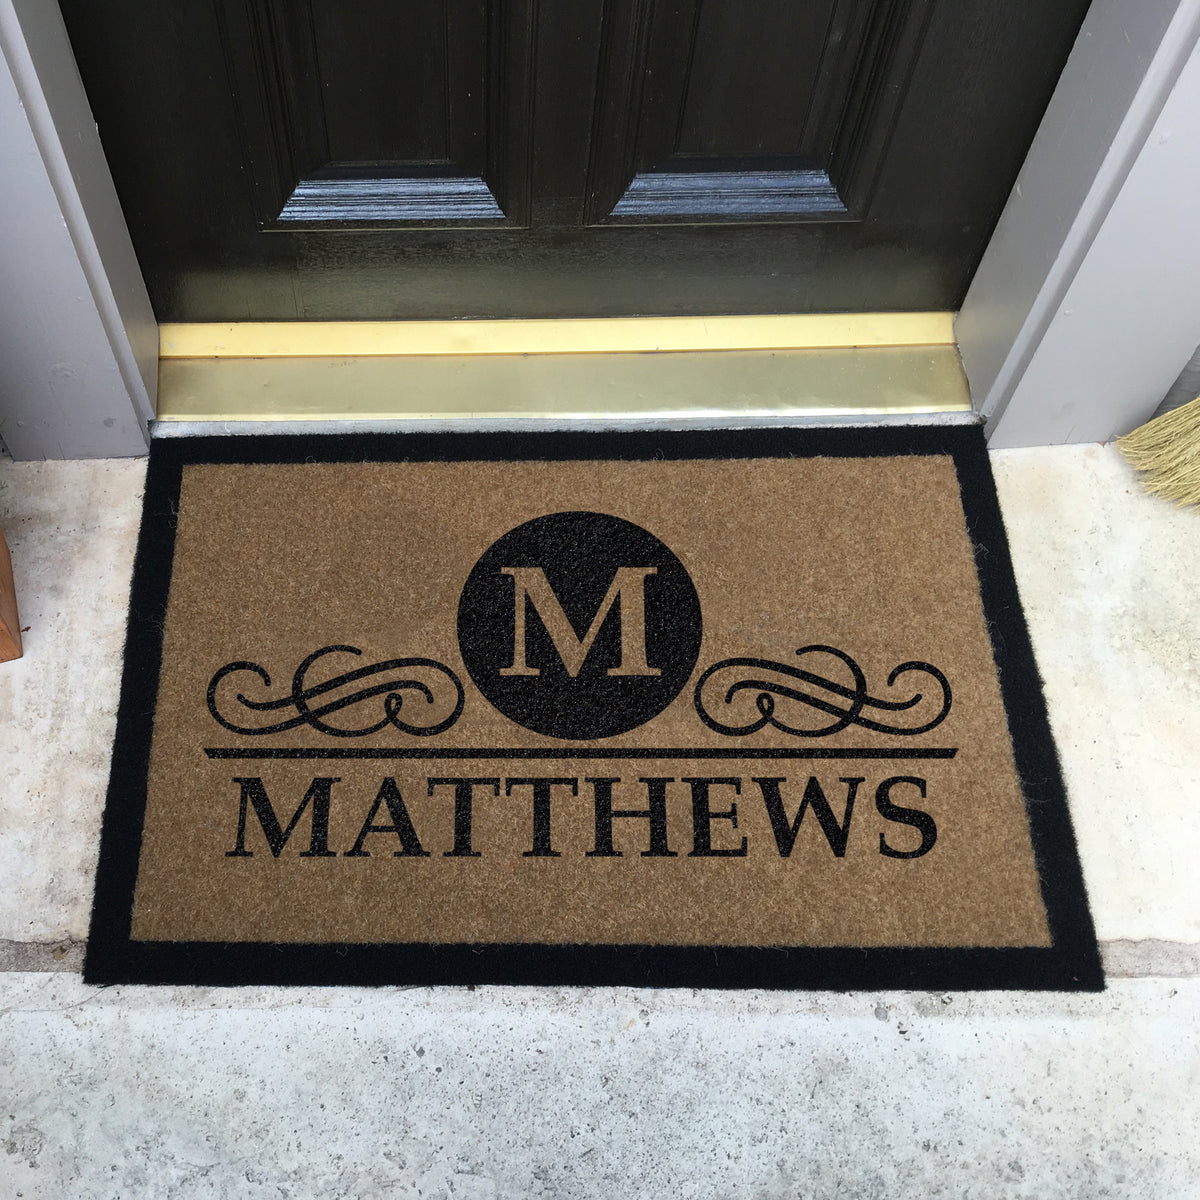 Infinity Custom Mats™ All-Weather Personalized Door Mat -.STYLE: MATTHEWS COLOR:TAN - rugsthatfit.com